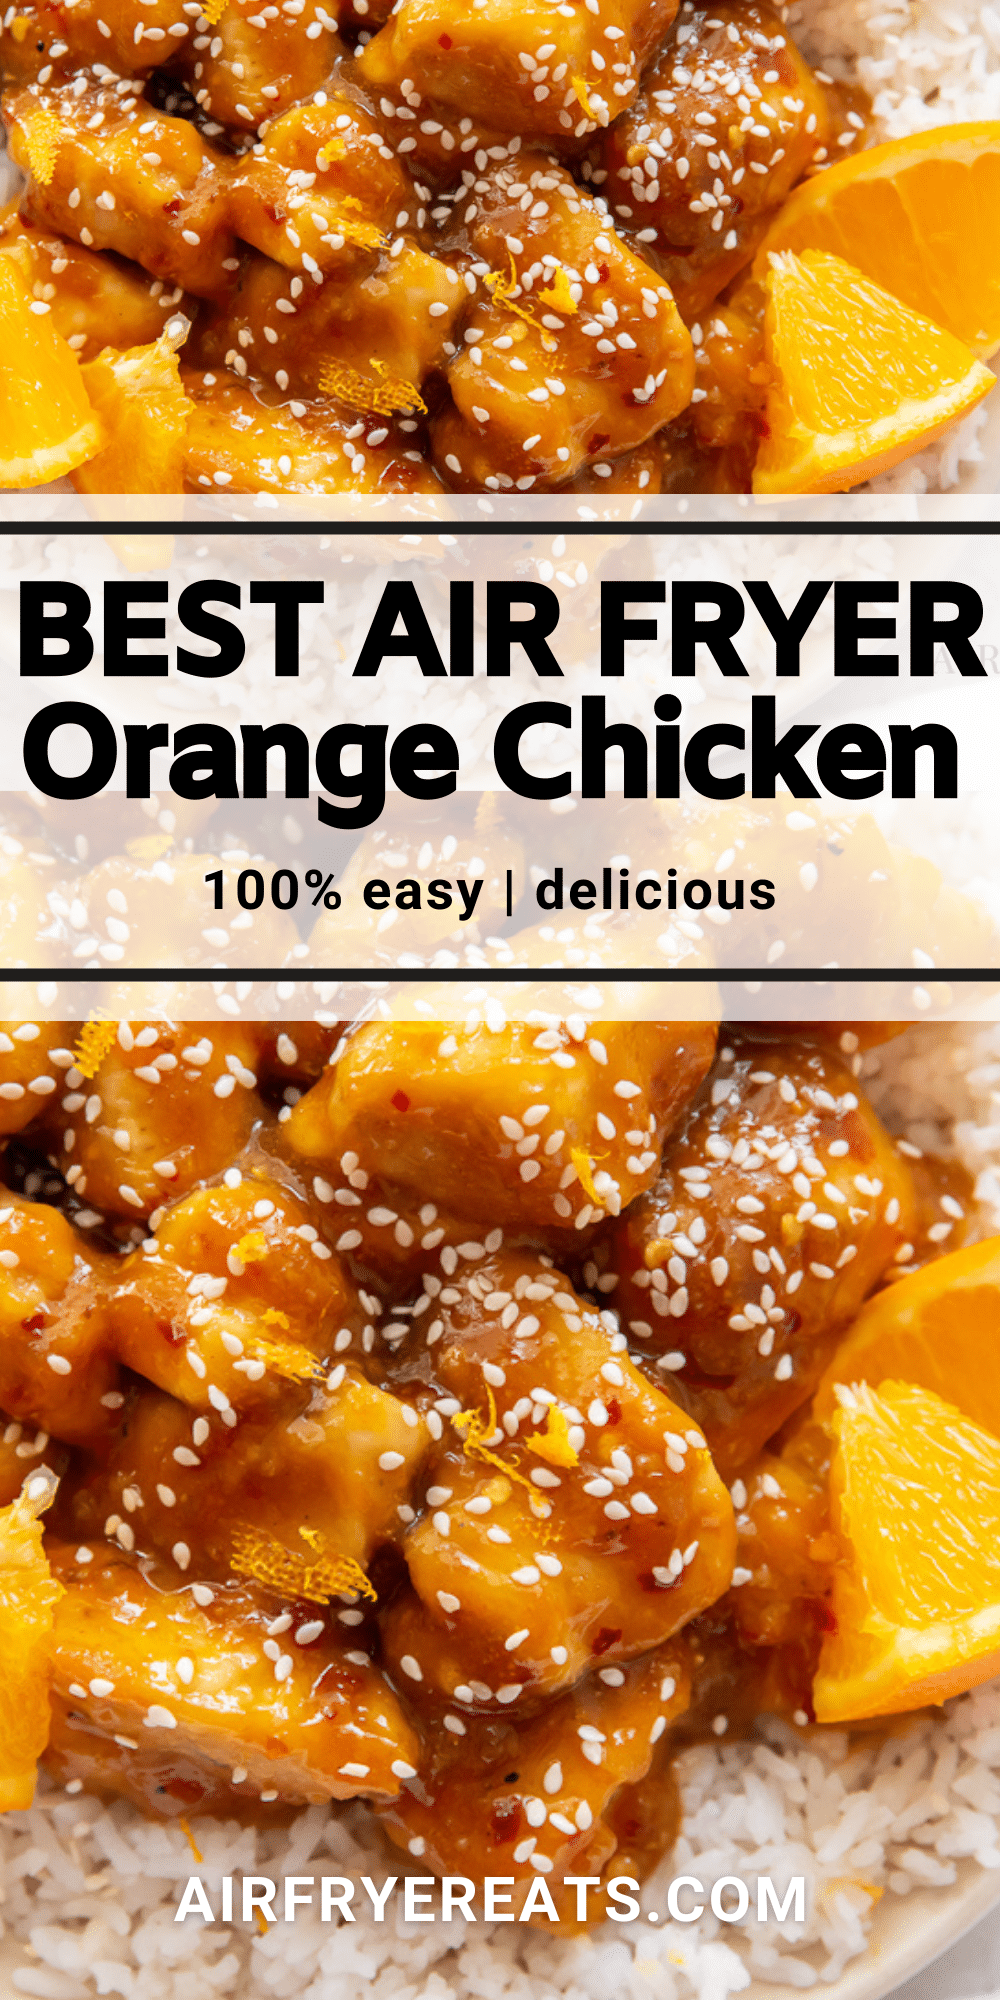 Images of air fryer orange chicken with text overlay